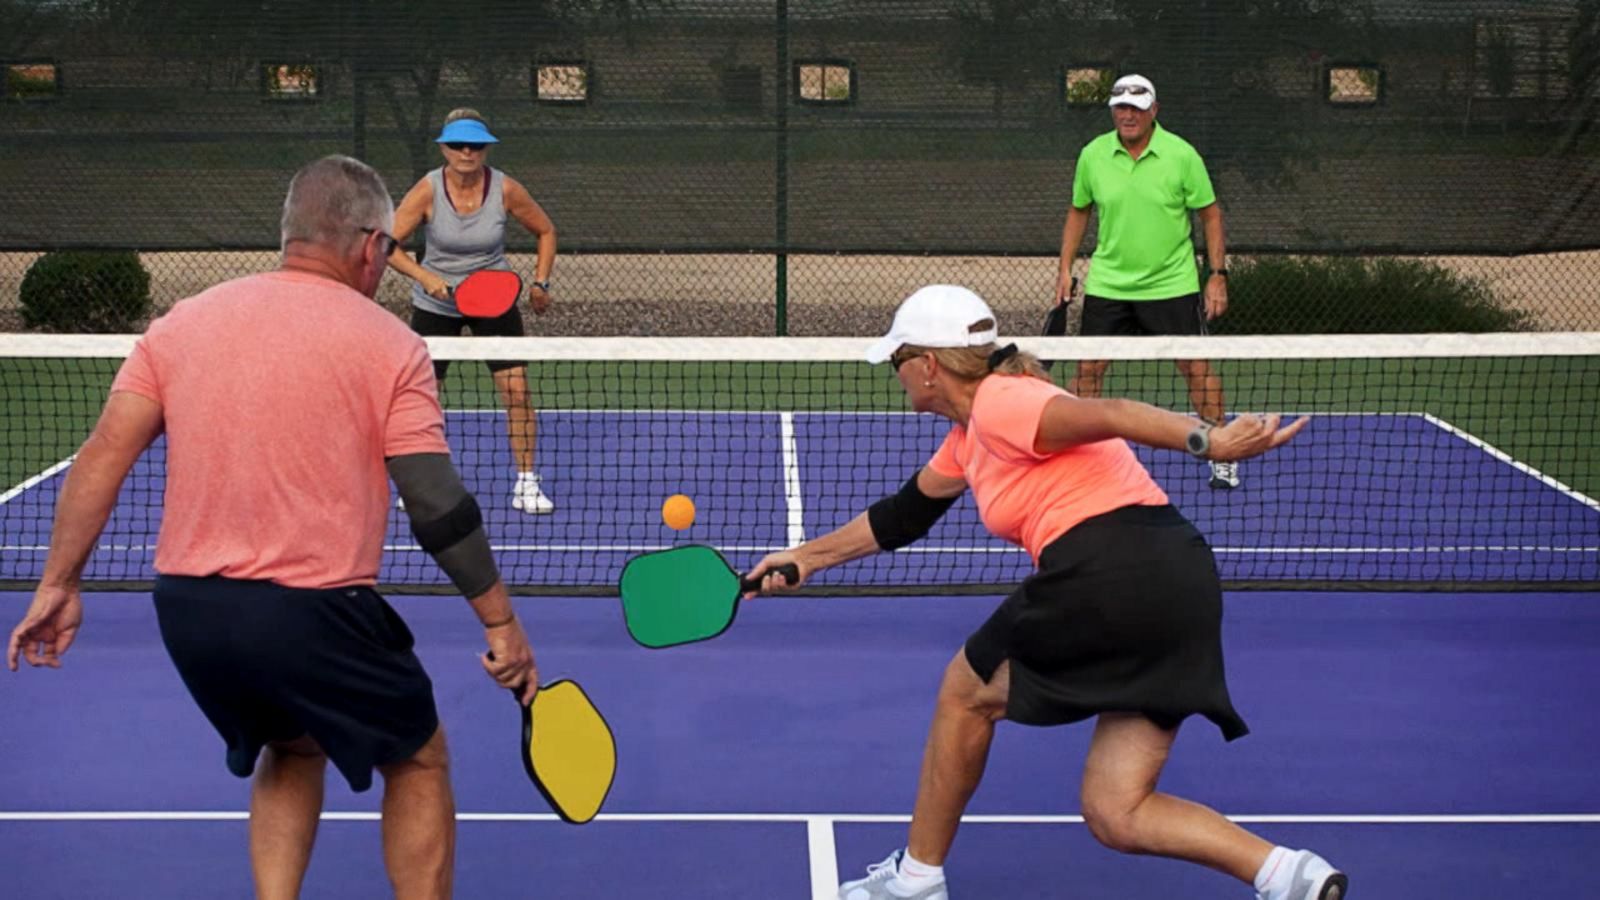 Has the Singles Tie-Breaker Changed the Game of Pickleball Forever?